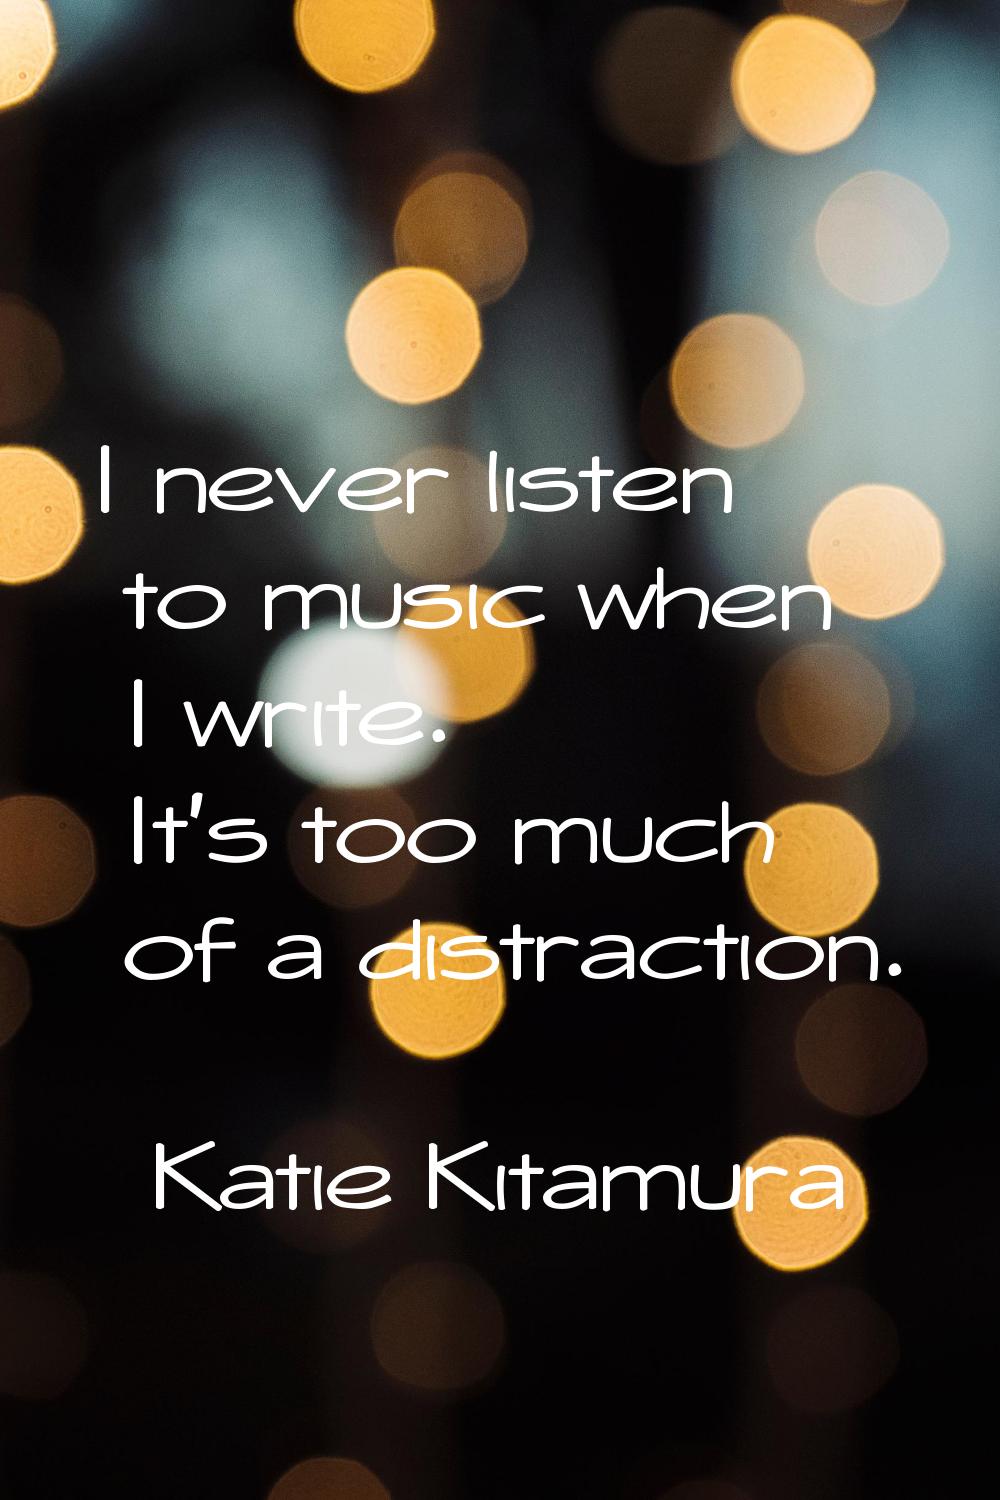 I never listen to music when I write. It's too much of a distraction.